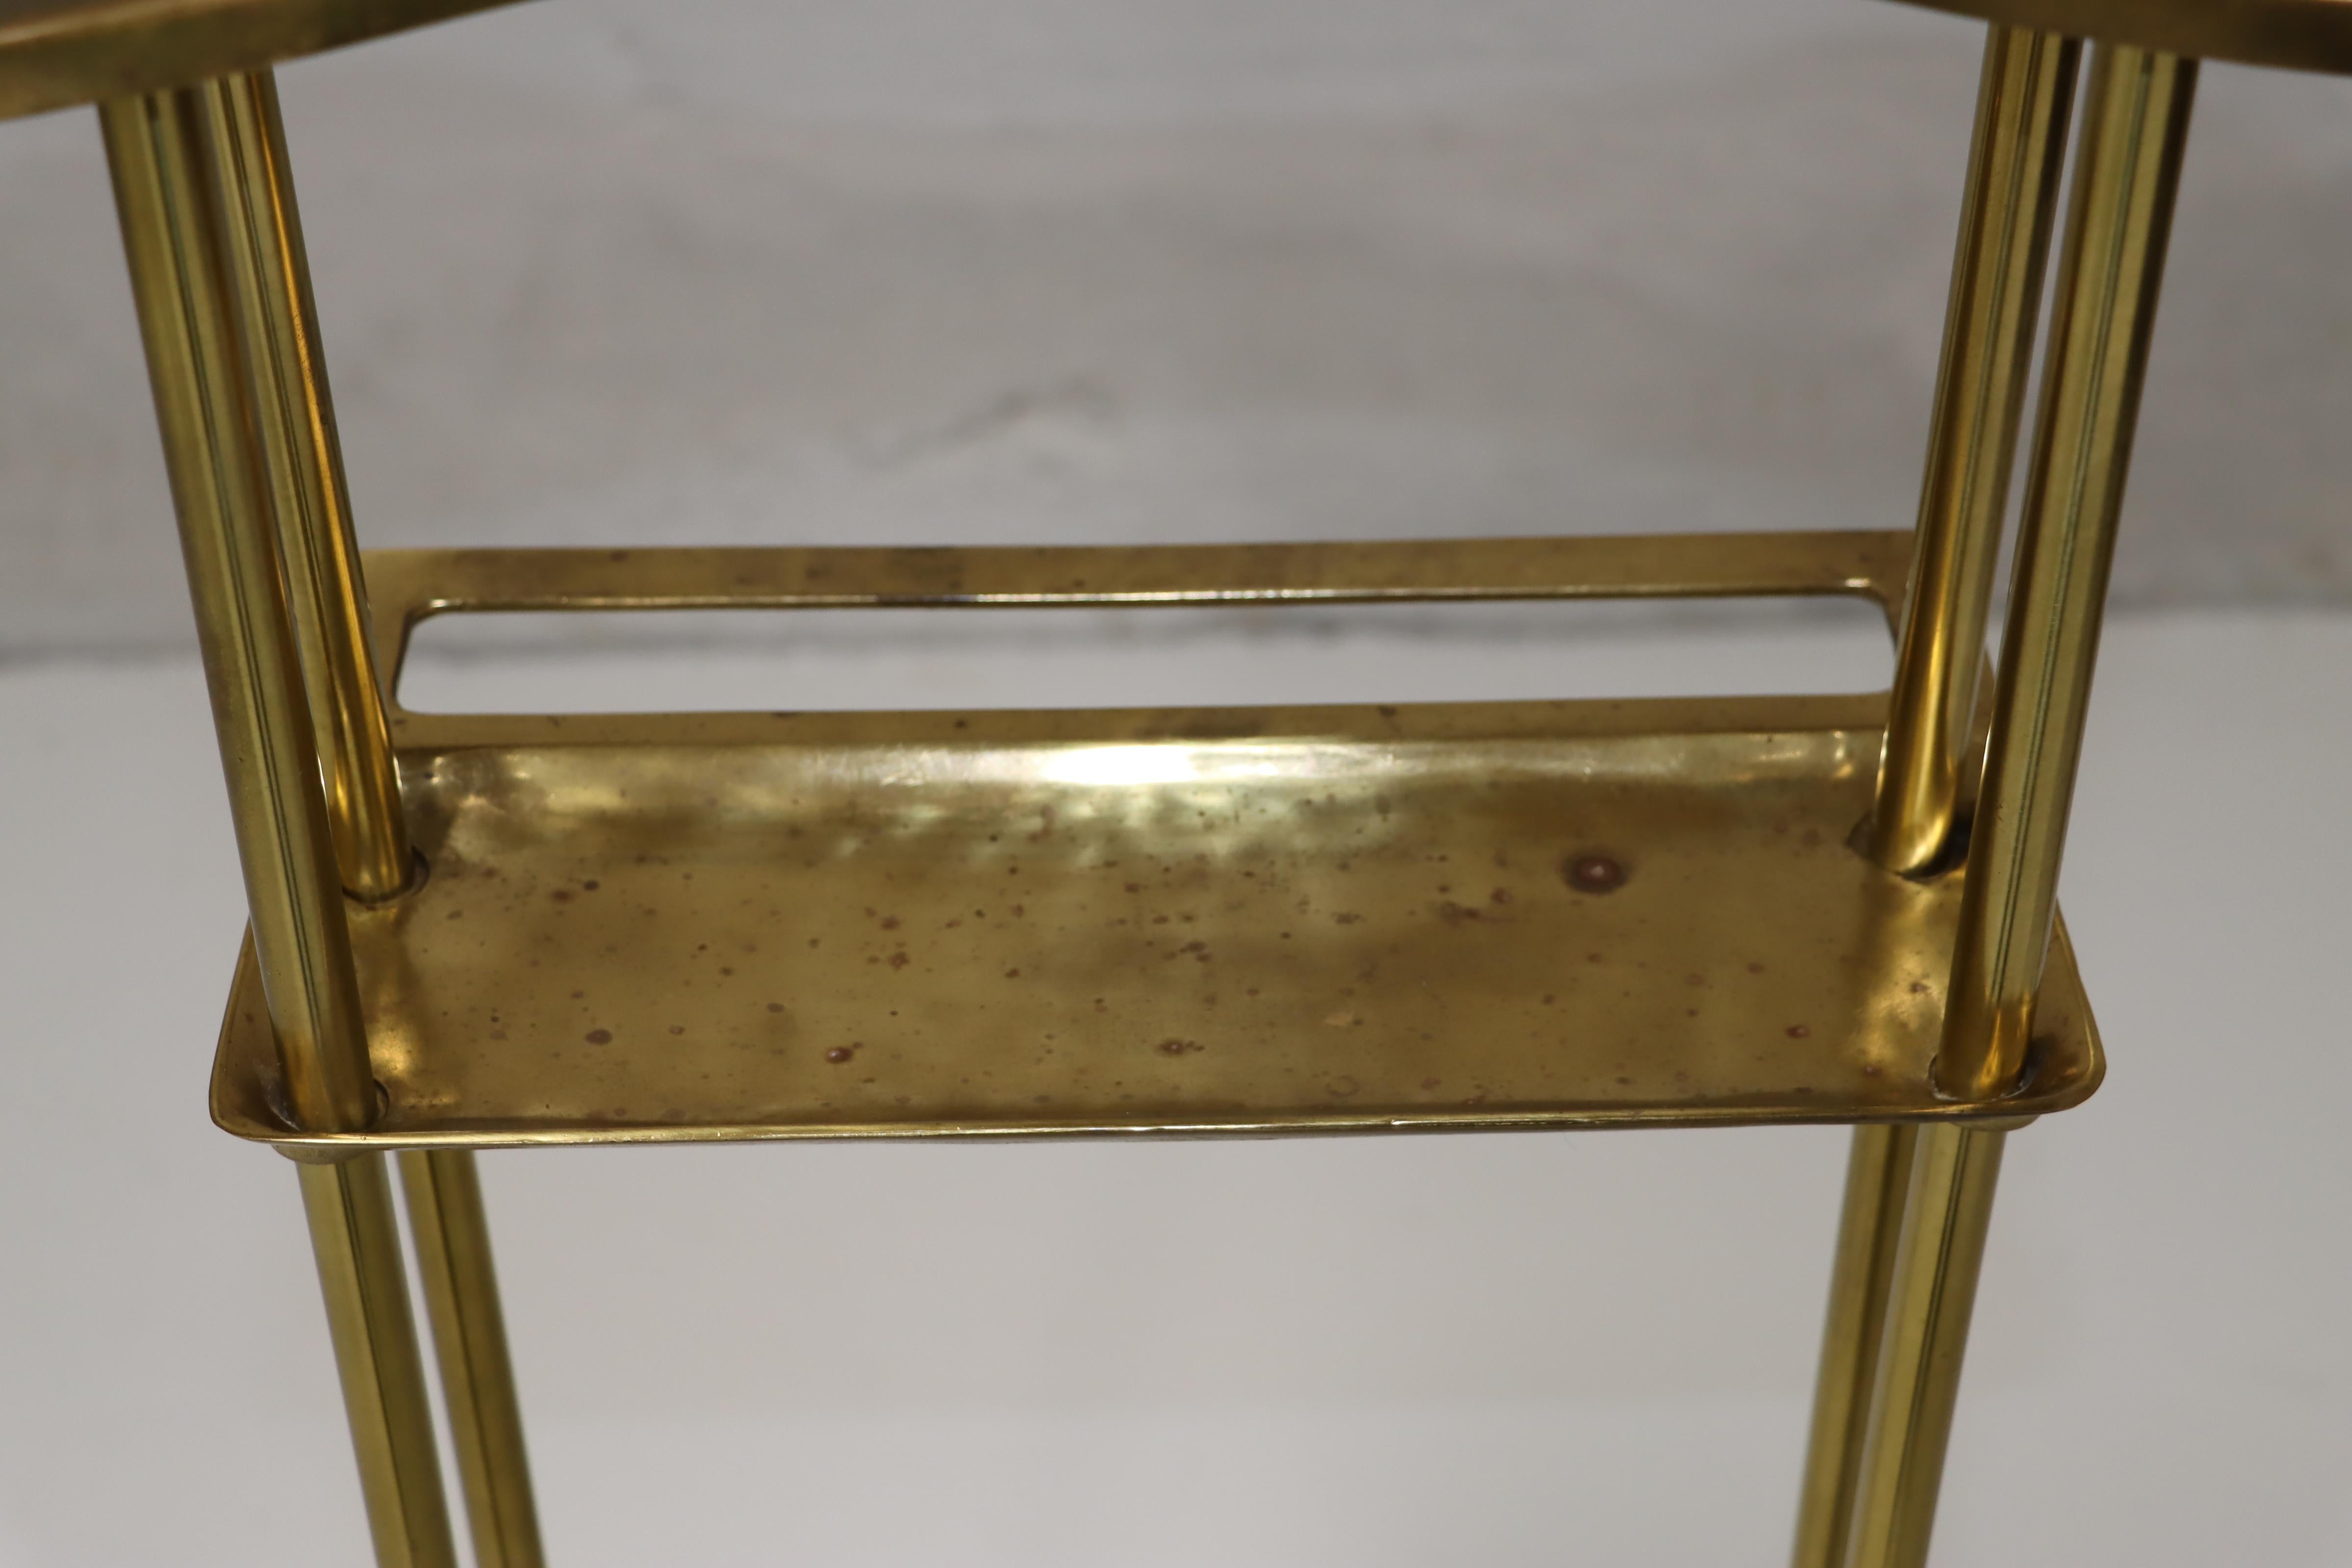 1980's Modernist Brass Valet Stand By Decorative Crafts Inc. For Sale 3